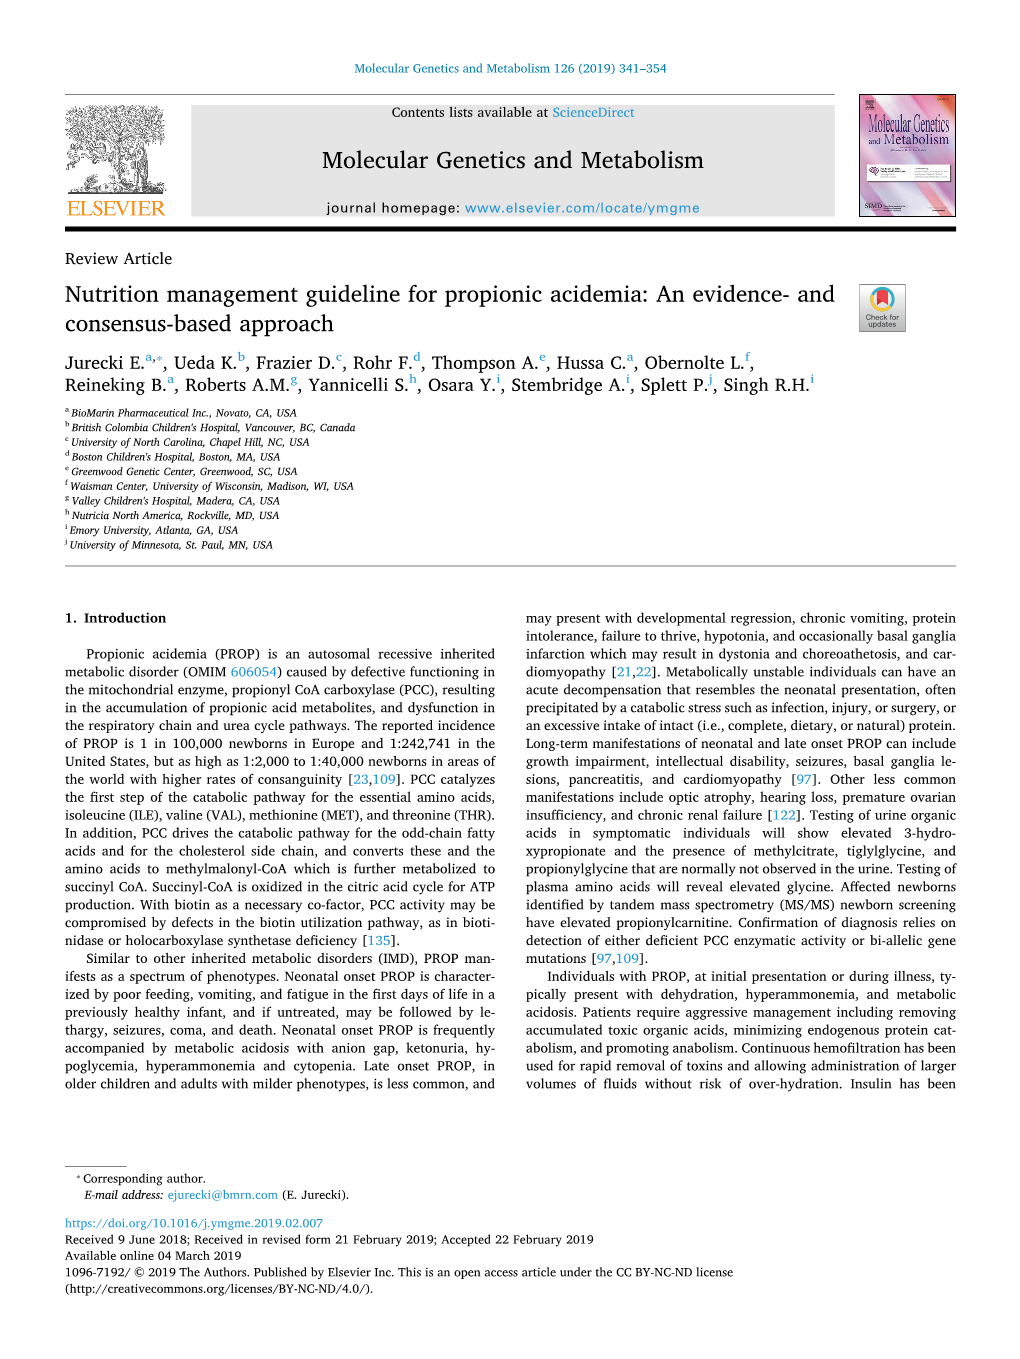 Nutrition Management Guideline for Propionic Acidemia an Evidence